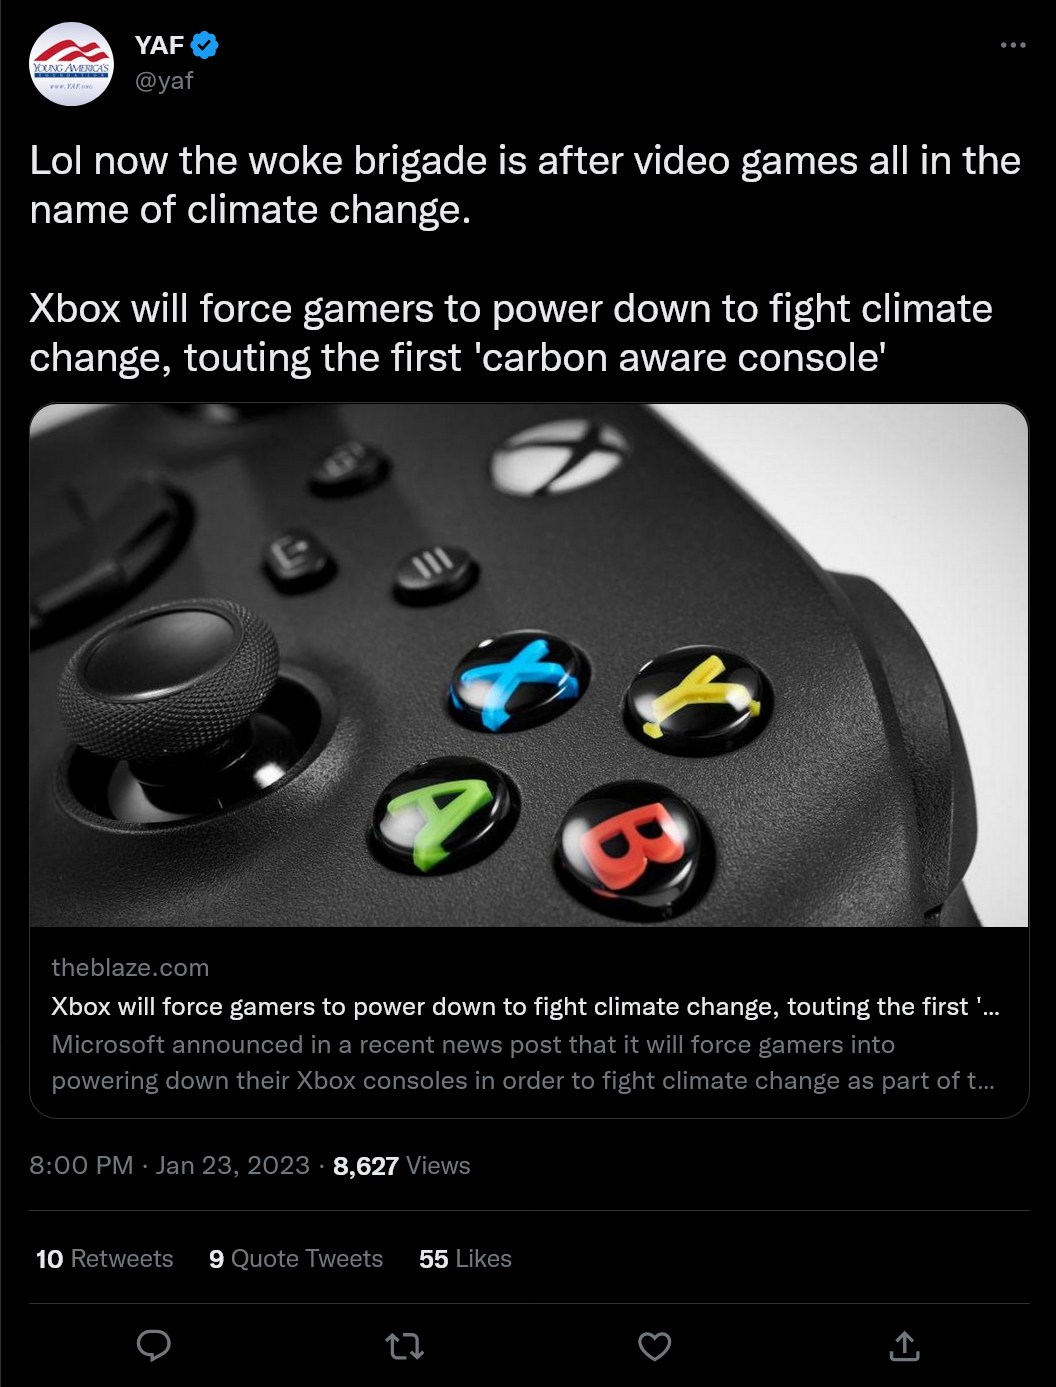 YAF tweets about Xbox power management